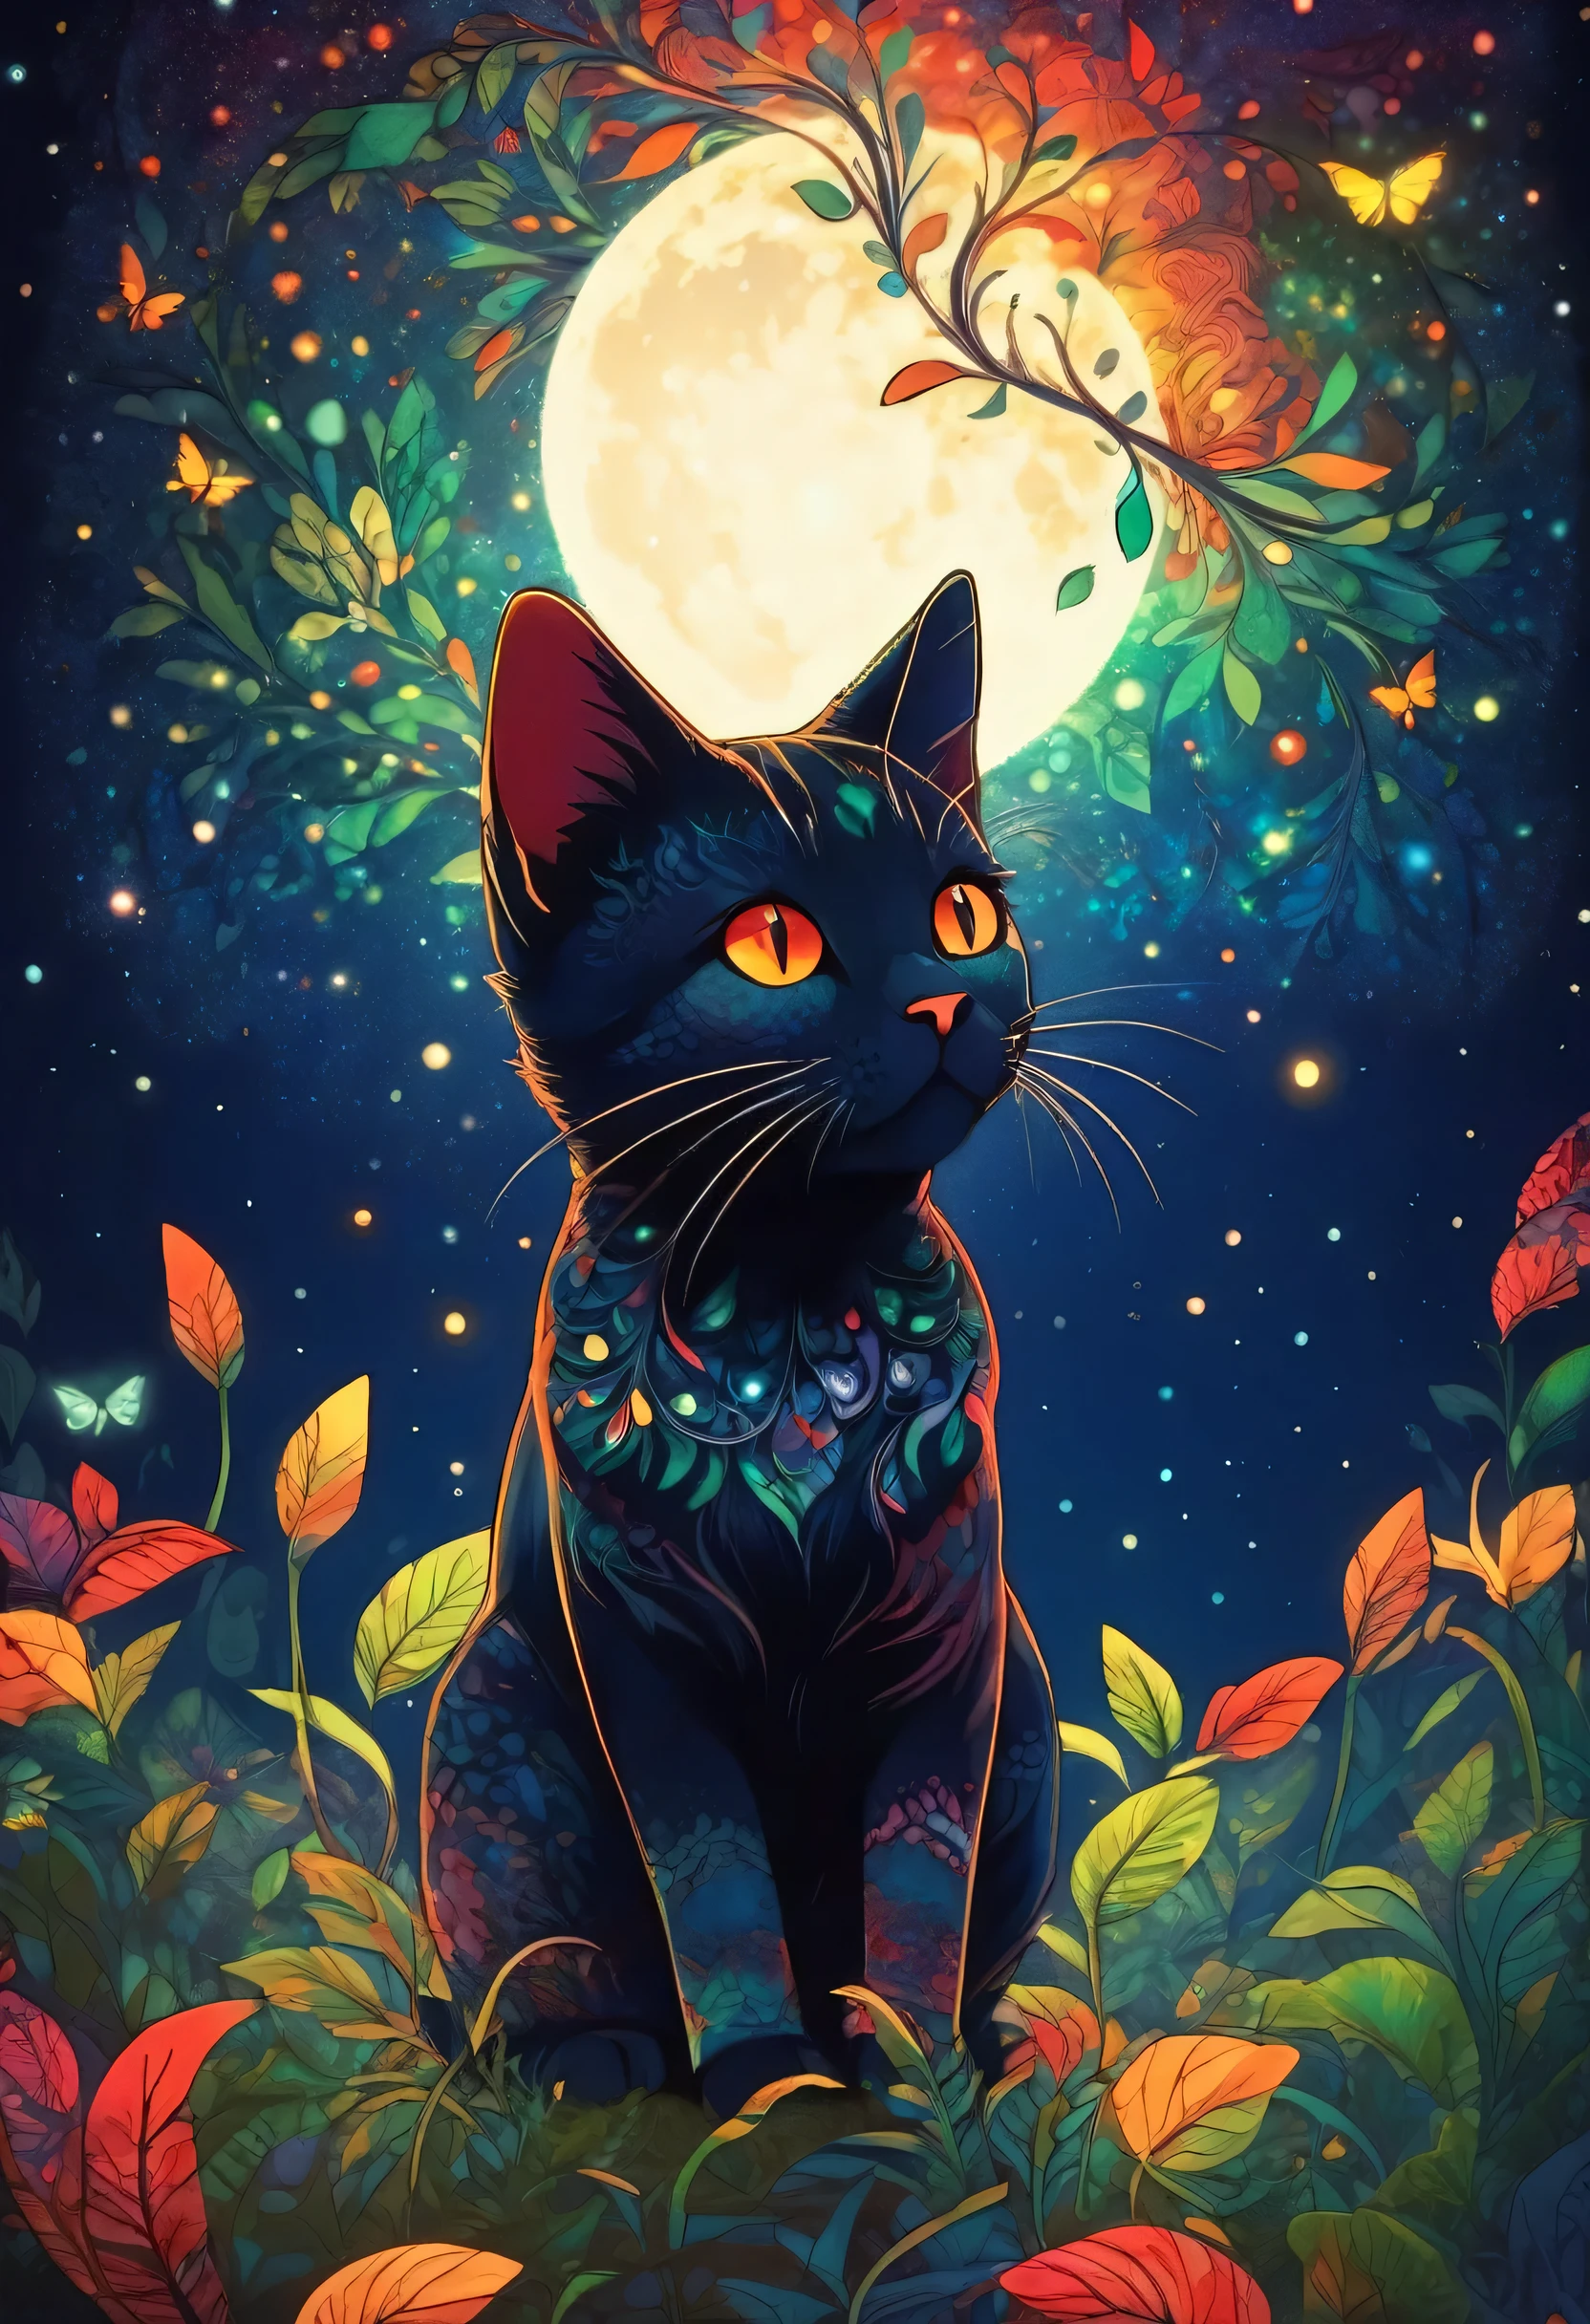 (highest quality,High resolution:1.2),Lots of firefly light、A cat looking up at the light from below、Colorful background,Navy Blue、Navy、red、green、Blurred,Zentangle Style,Fractal Style、Ball of Light、Smash it, stand out, The most inspiring silhouette ever, Shine, magic, thank you. By Tupu...lol...